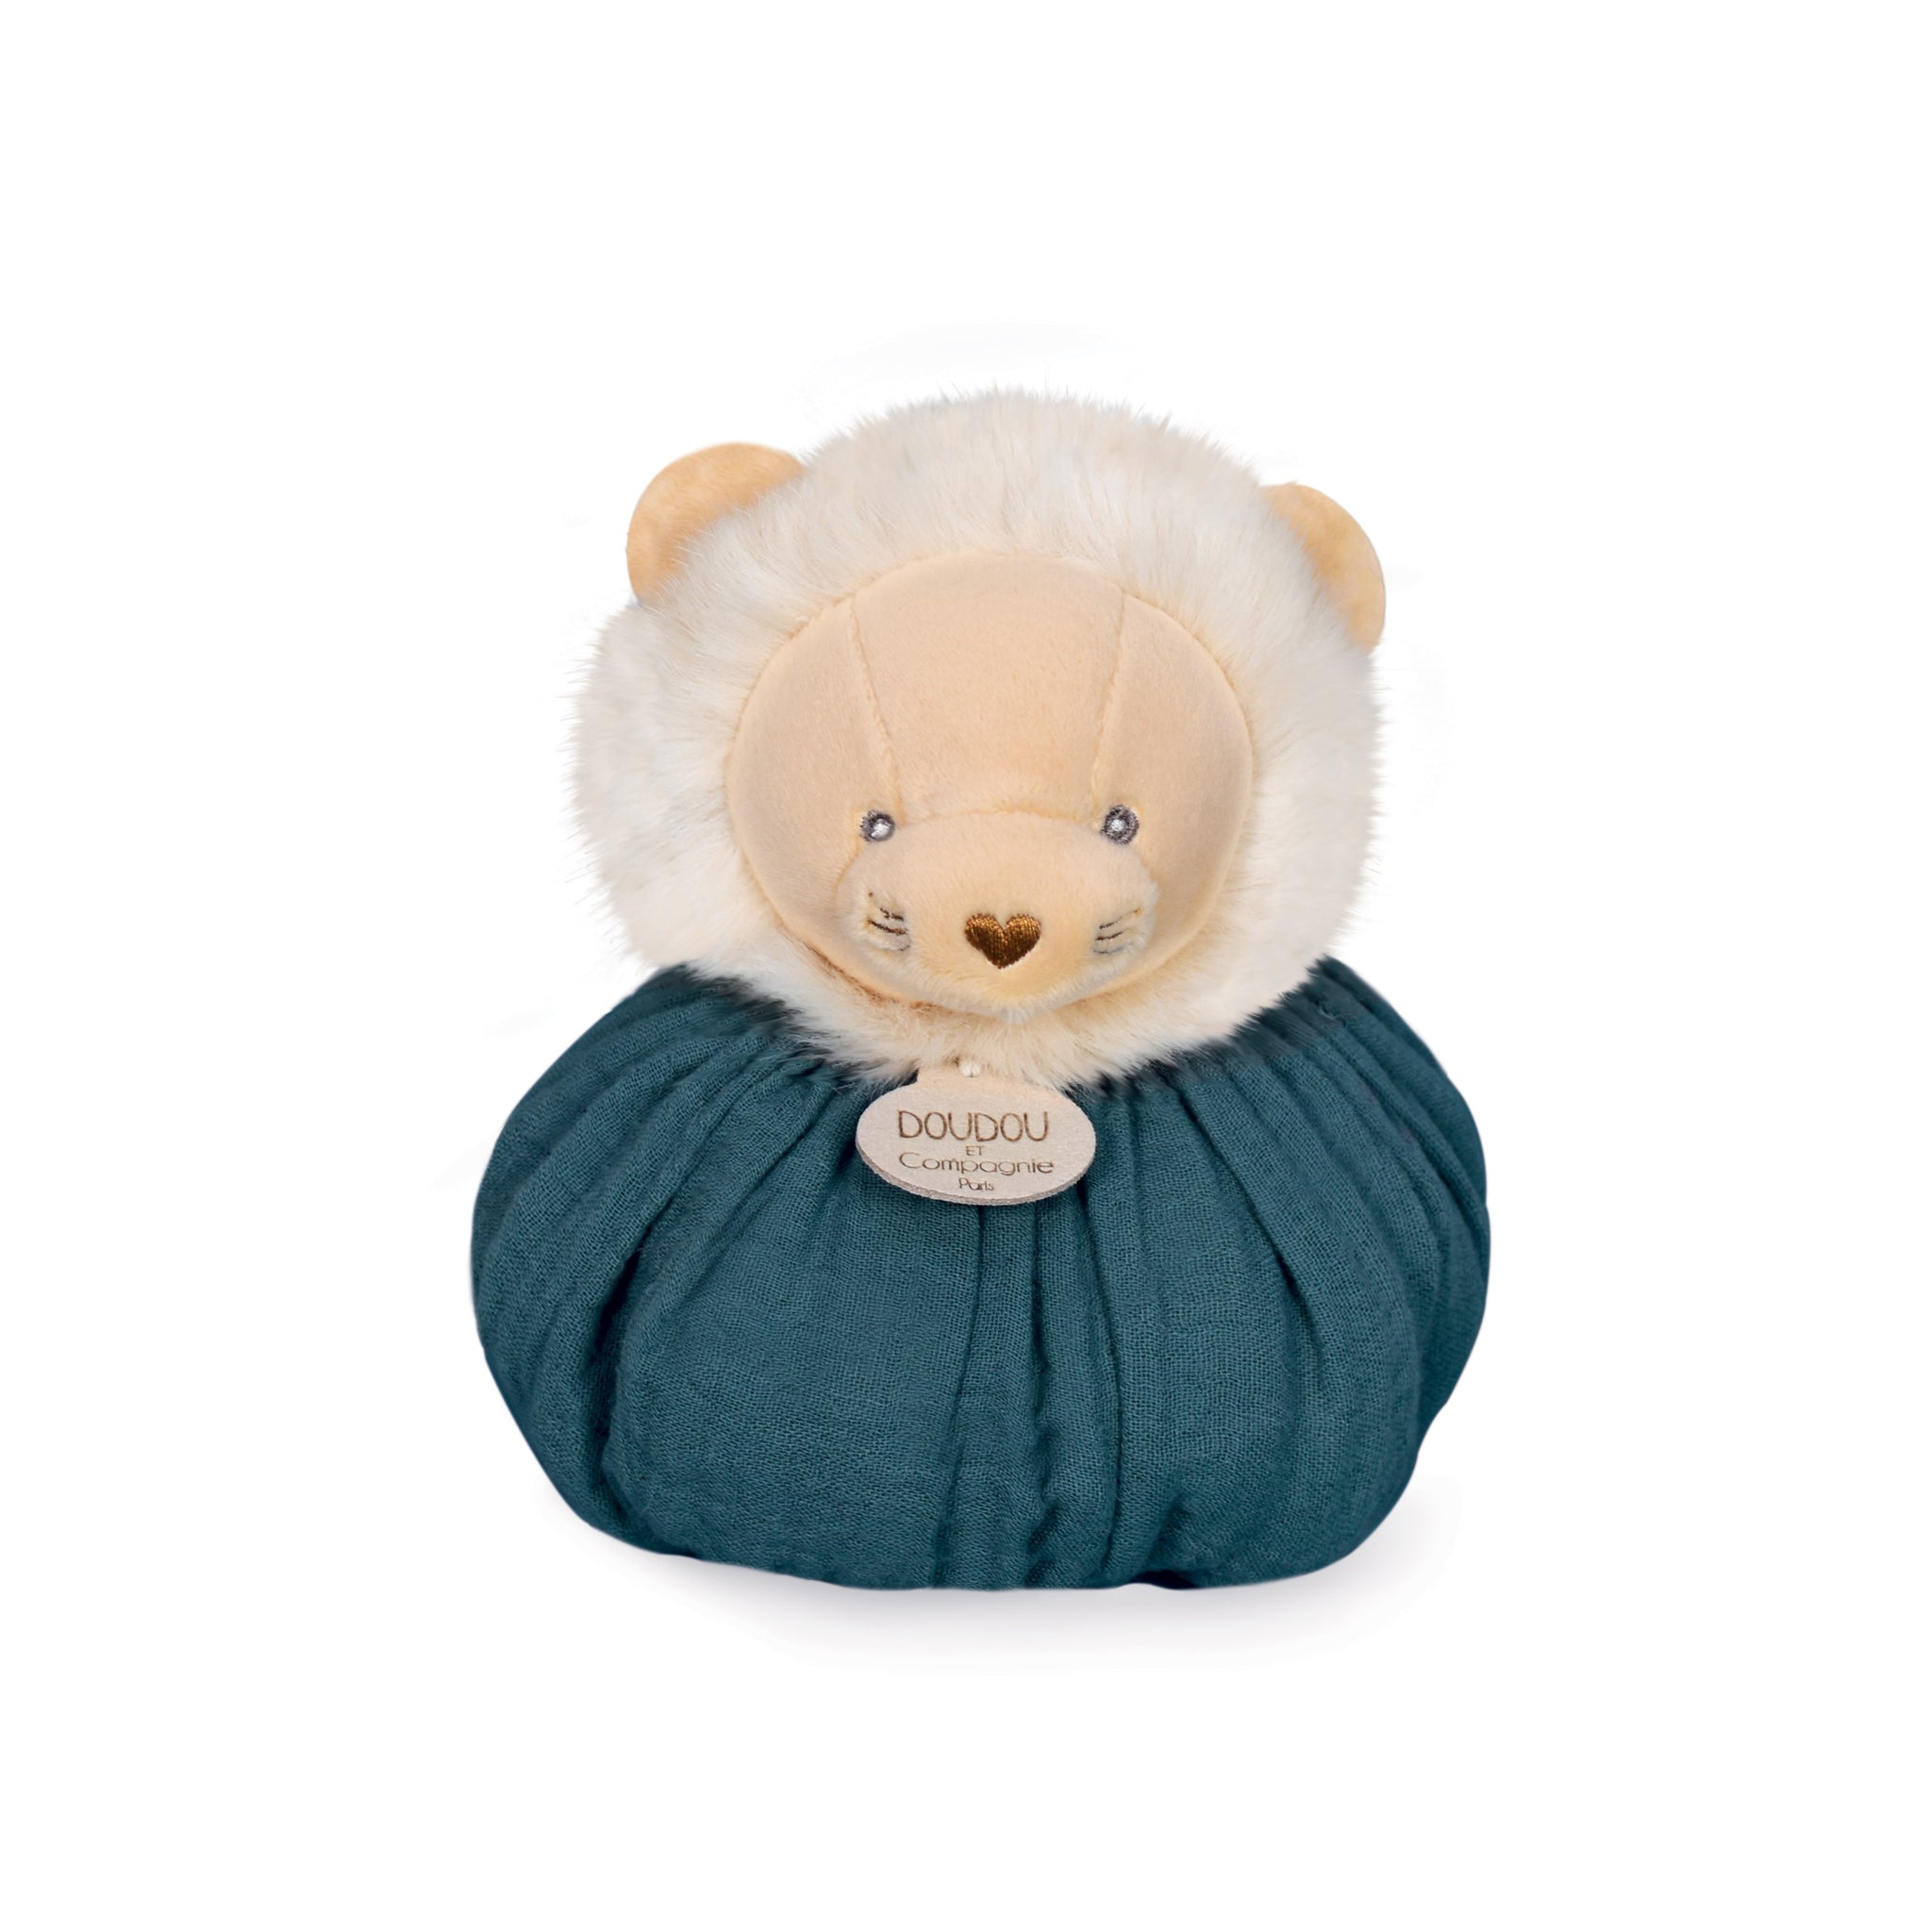 Doudou et Compagnie Boh'aime Lion Musical Pull Toy – Hotaling